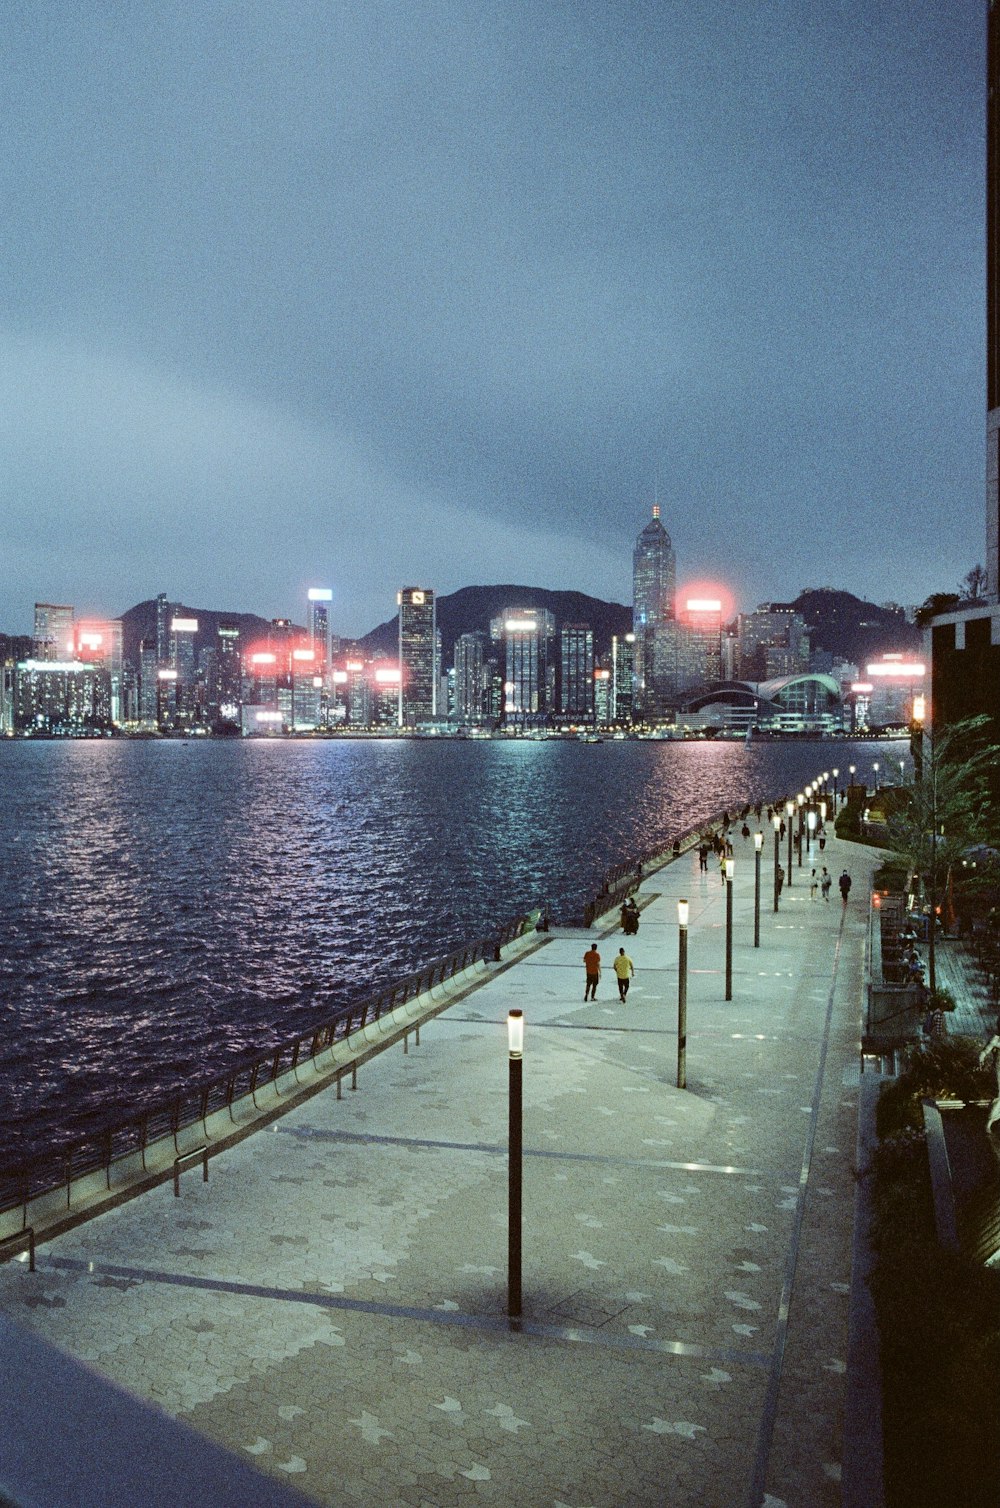 body of water near city buildings during night time